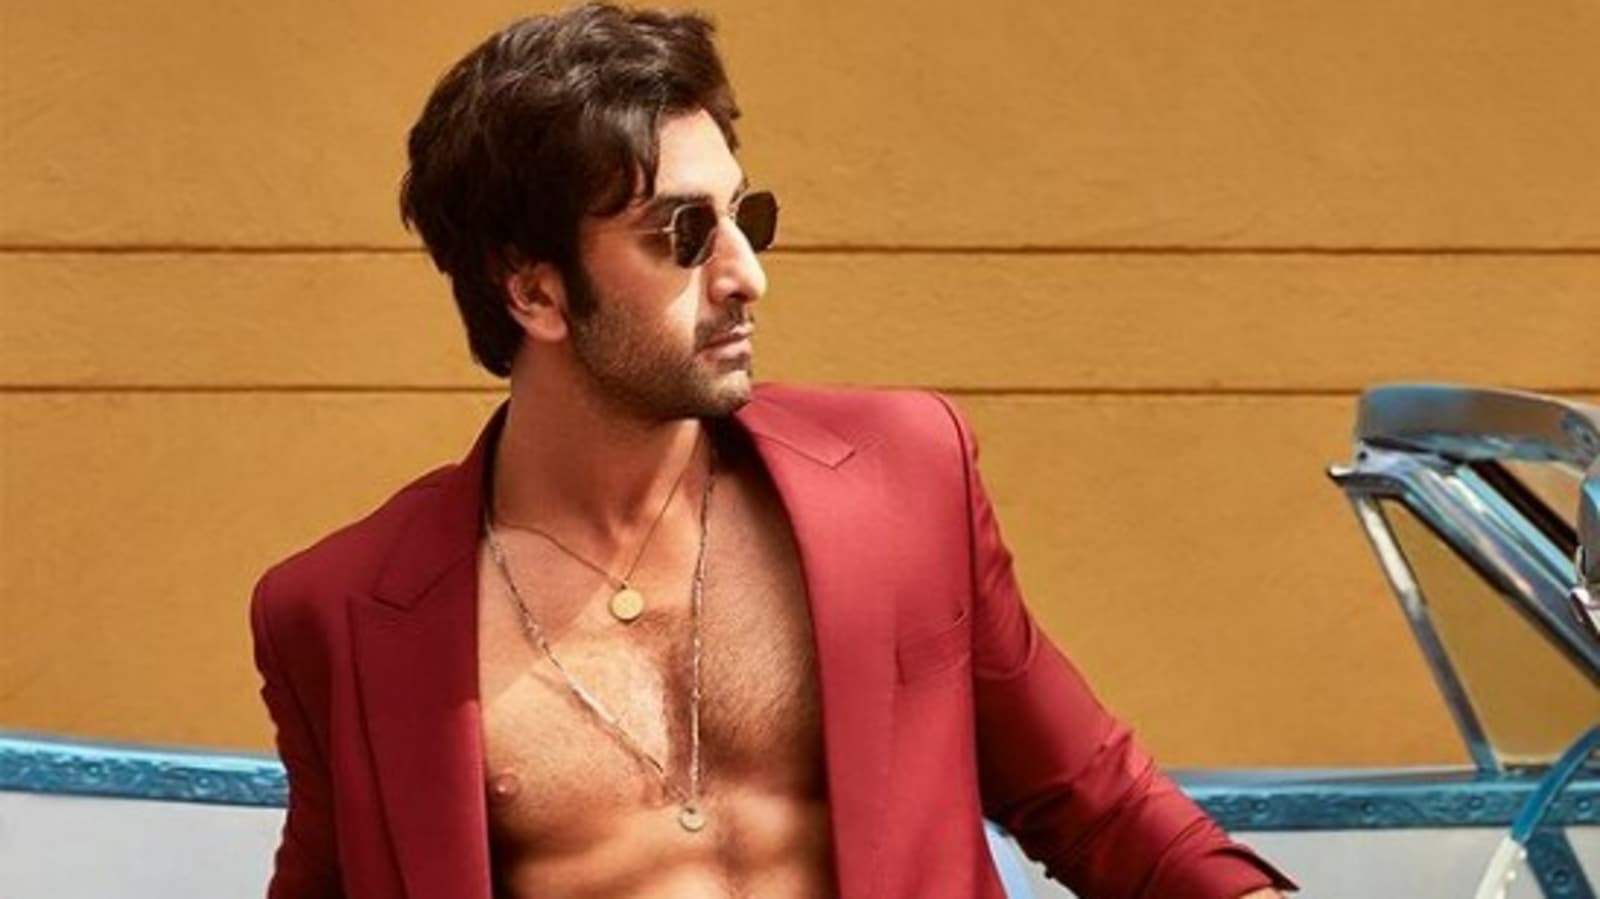 Ranbir Kapoor Gets Candid About Becoming Labelled As Casanova And Cheater;  'Doesn't Bother Me If Somebody Bi**es About Me